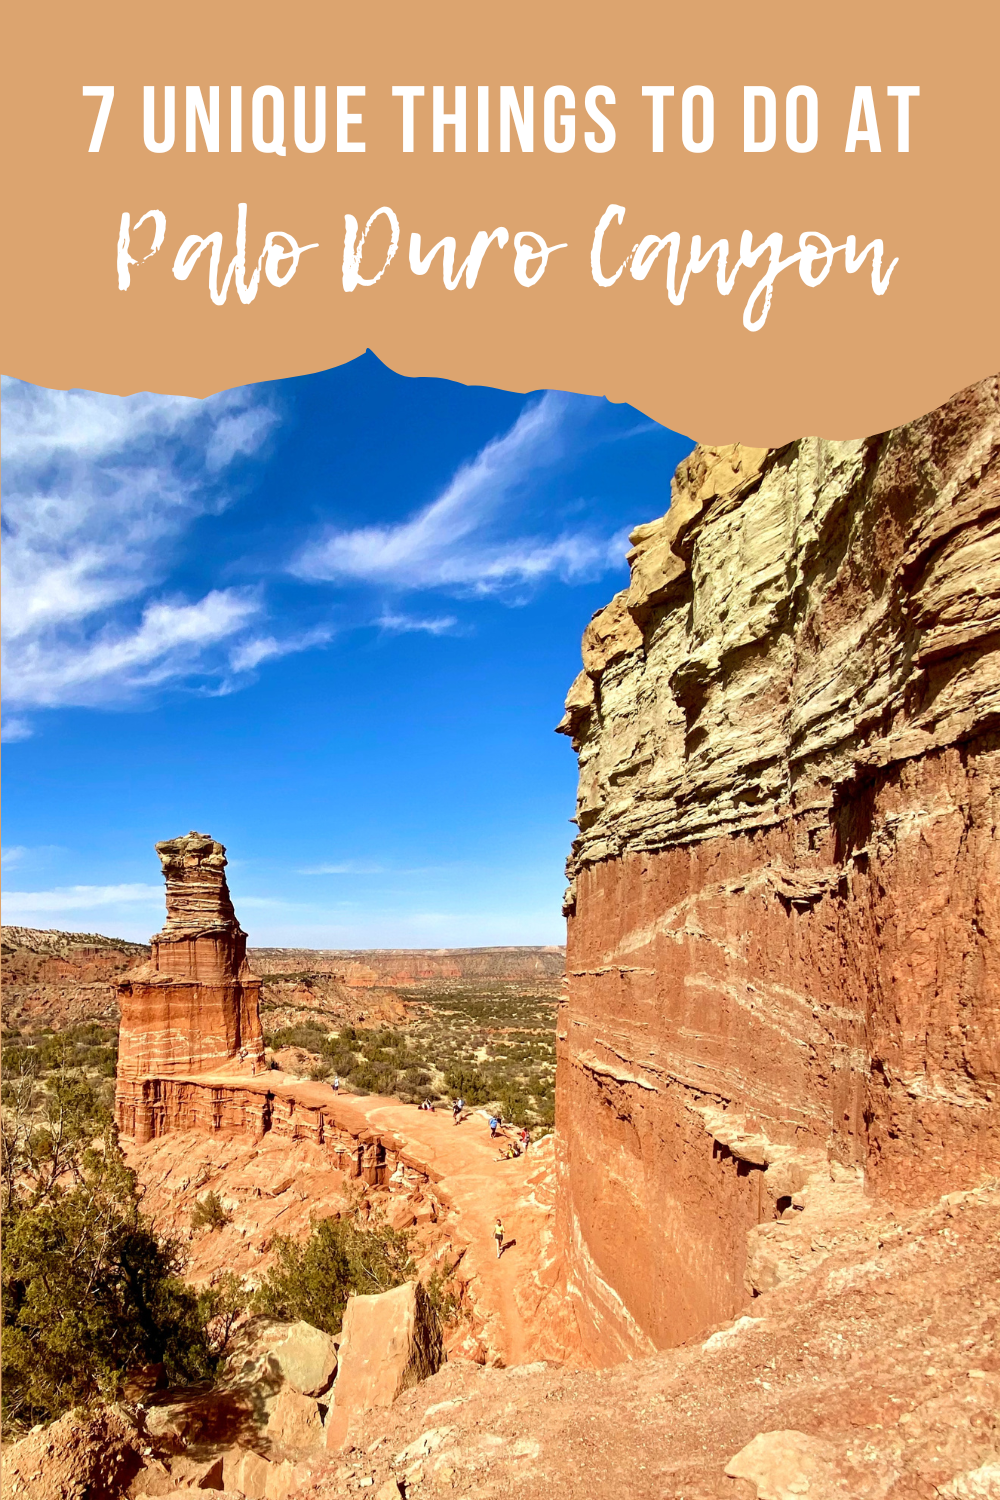 7 Unique Things to do at Palo Duro Canyon State Park | Finding Mandee